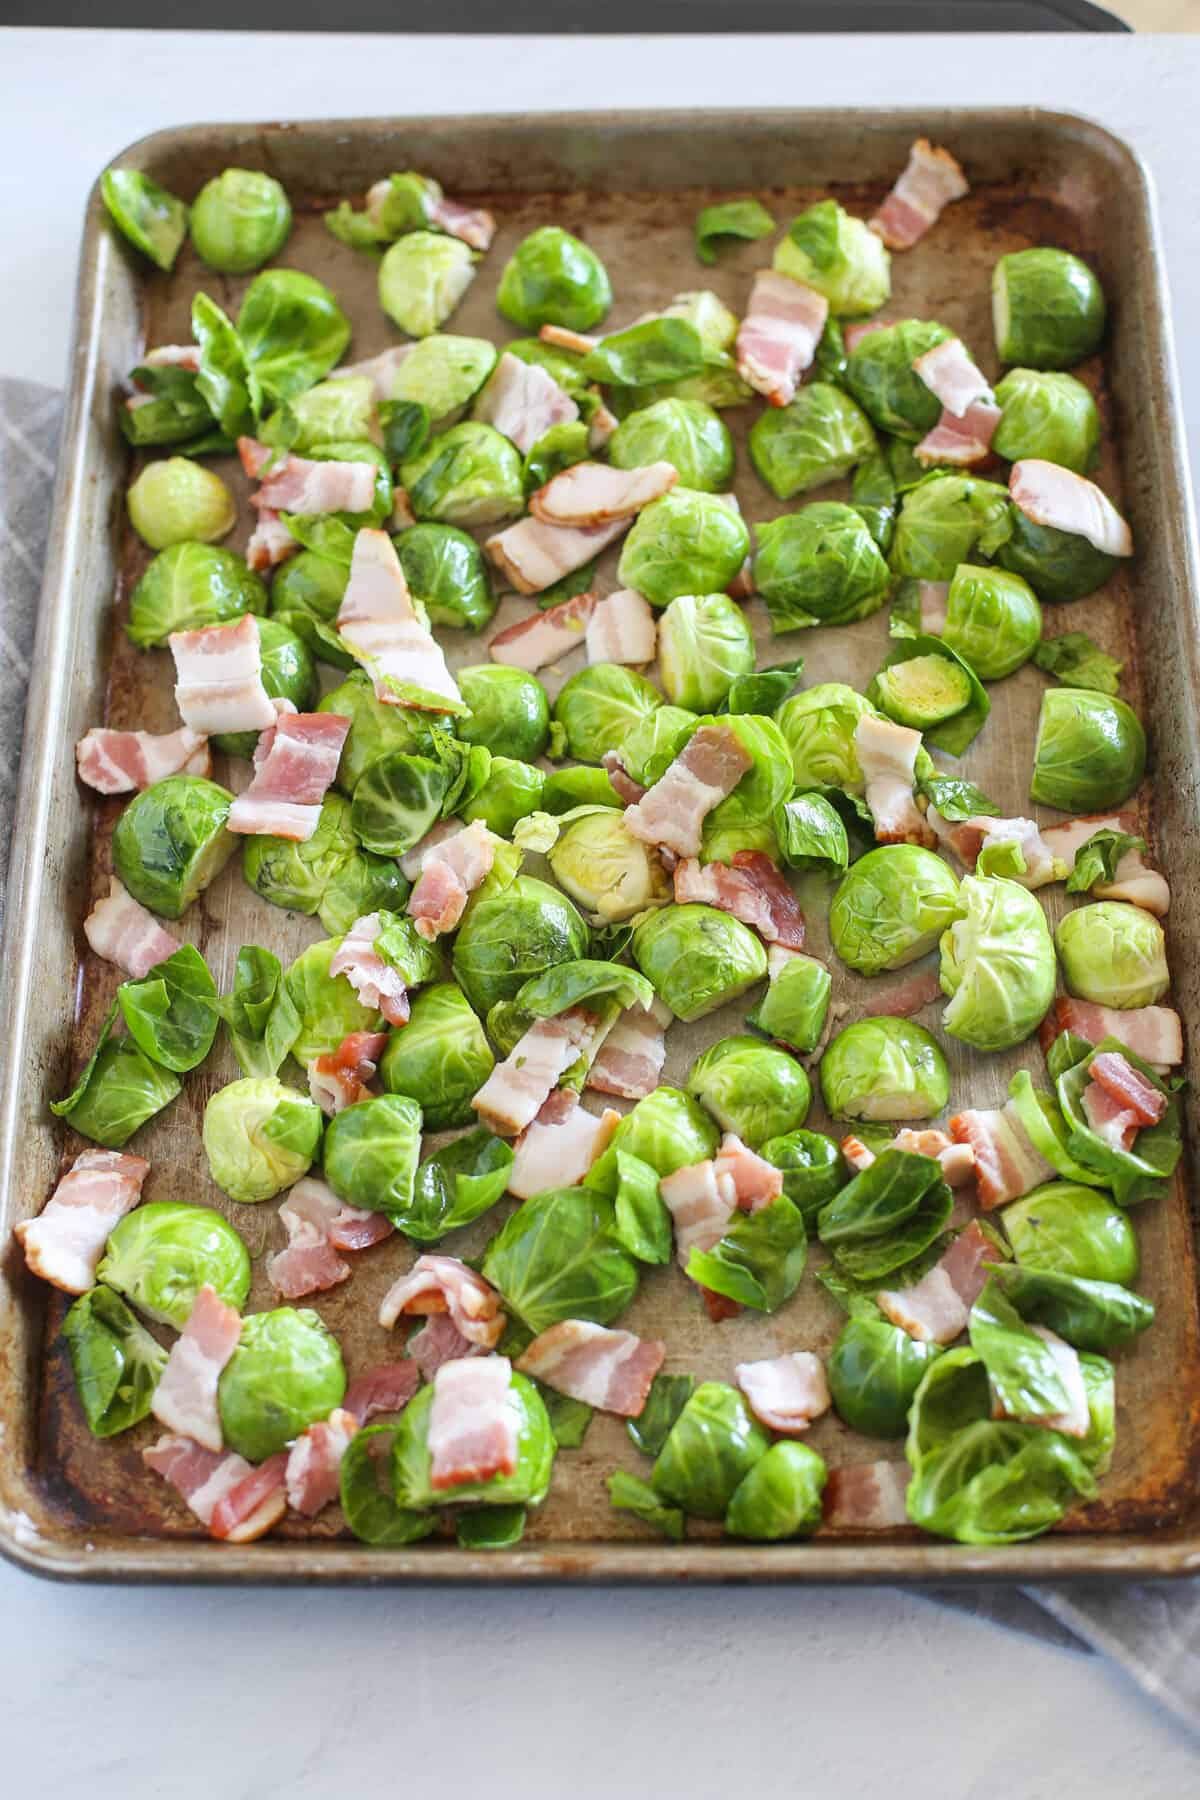 Uncooked chopped brussels sprouts and chopped bacon on a baking sheet ready for the oven.